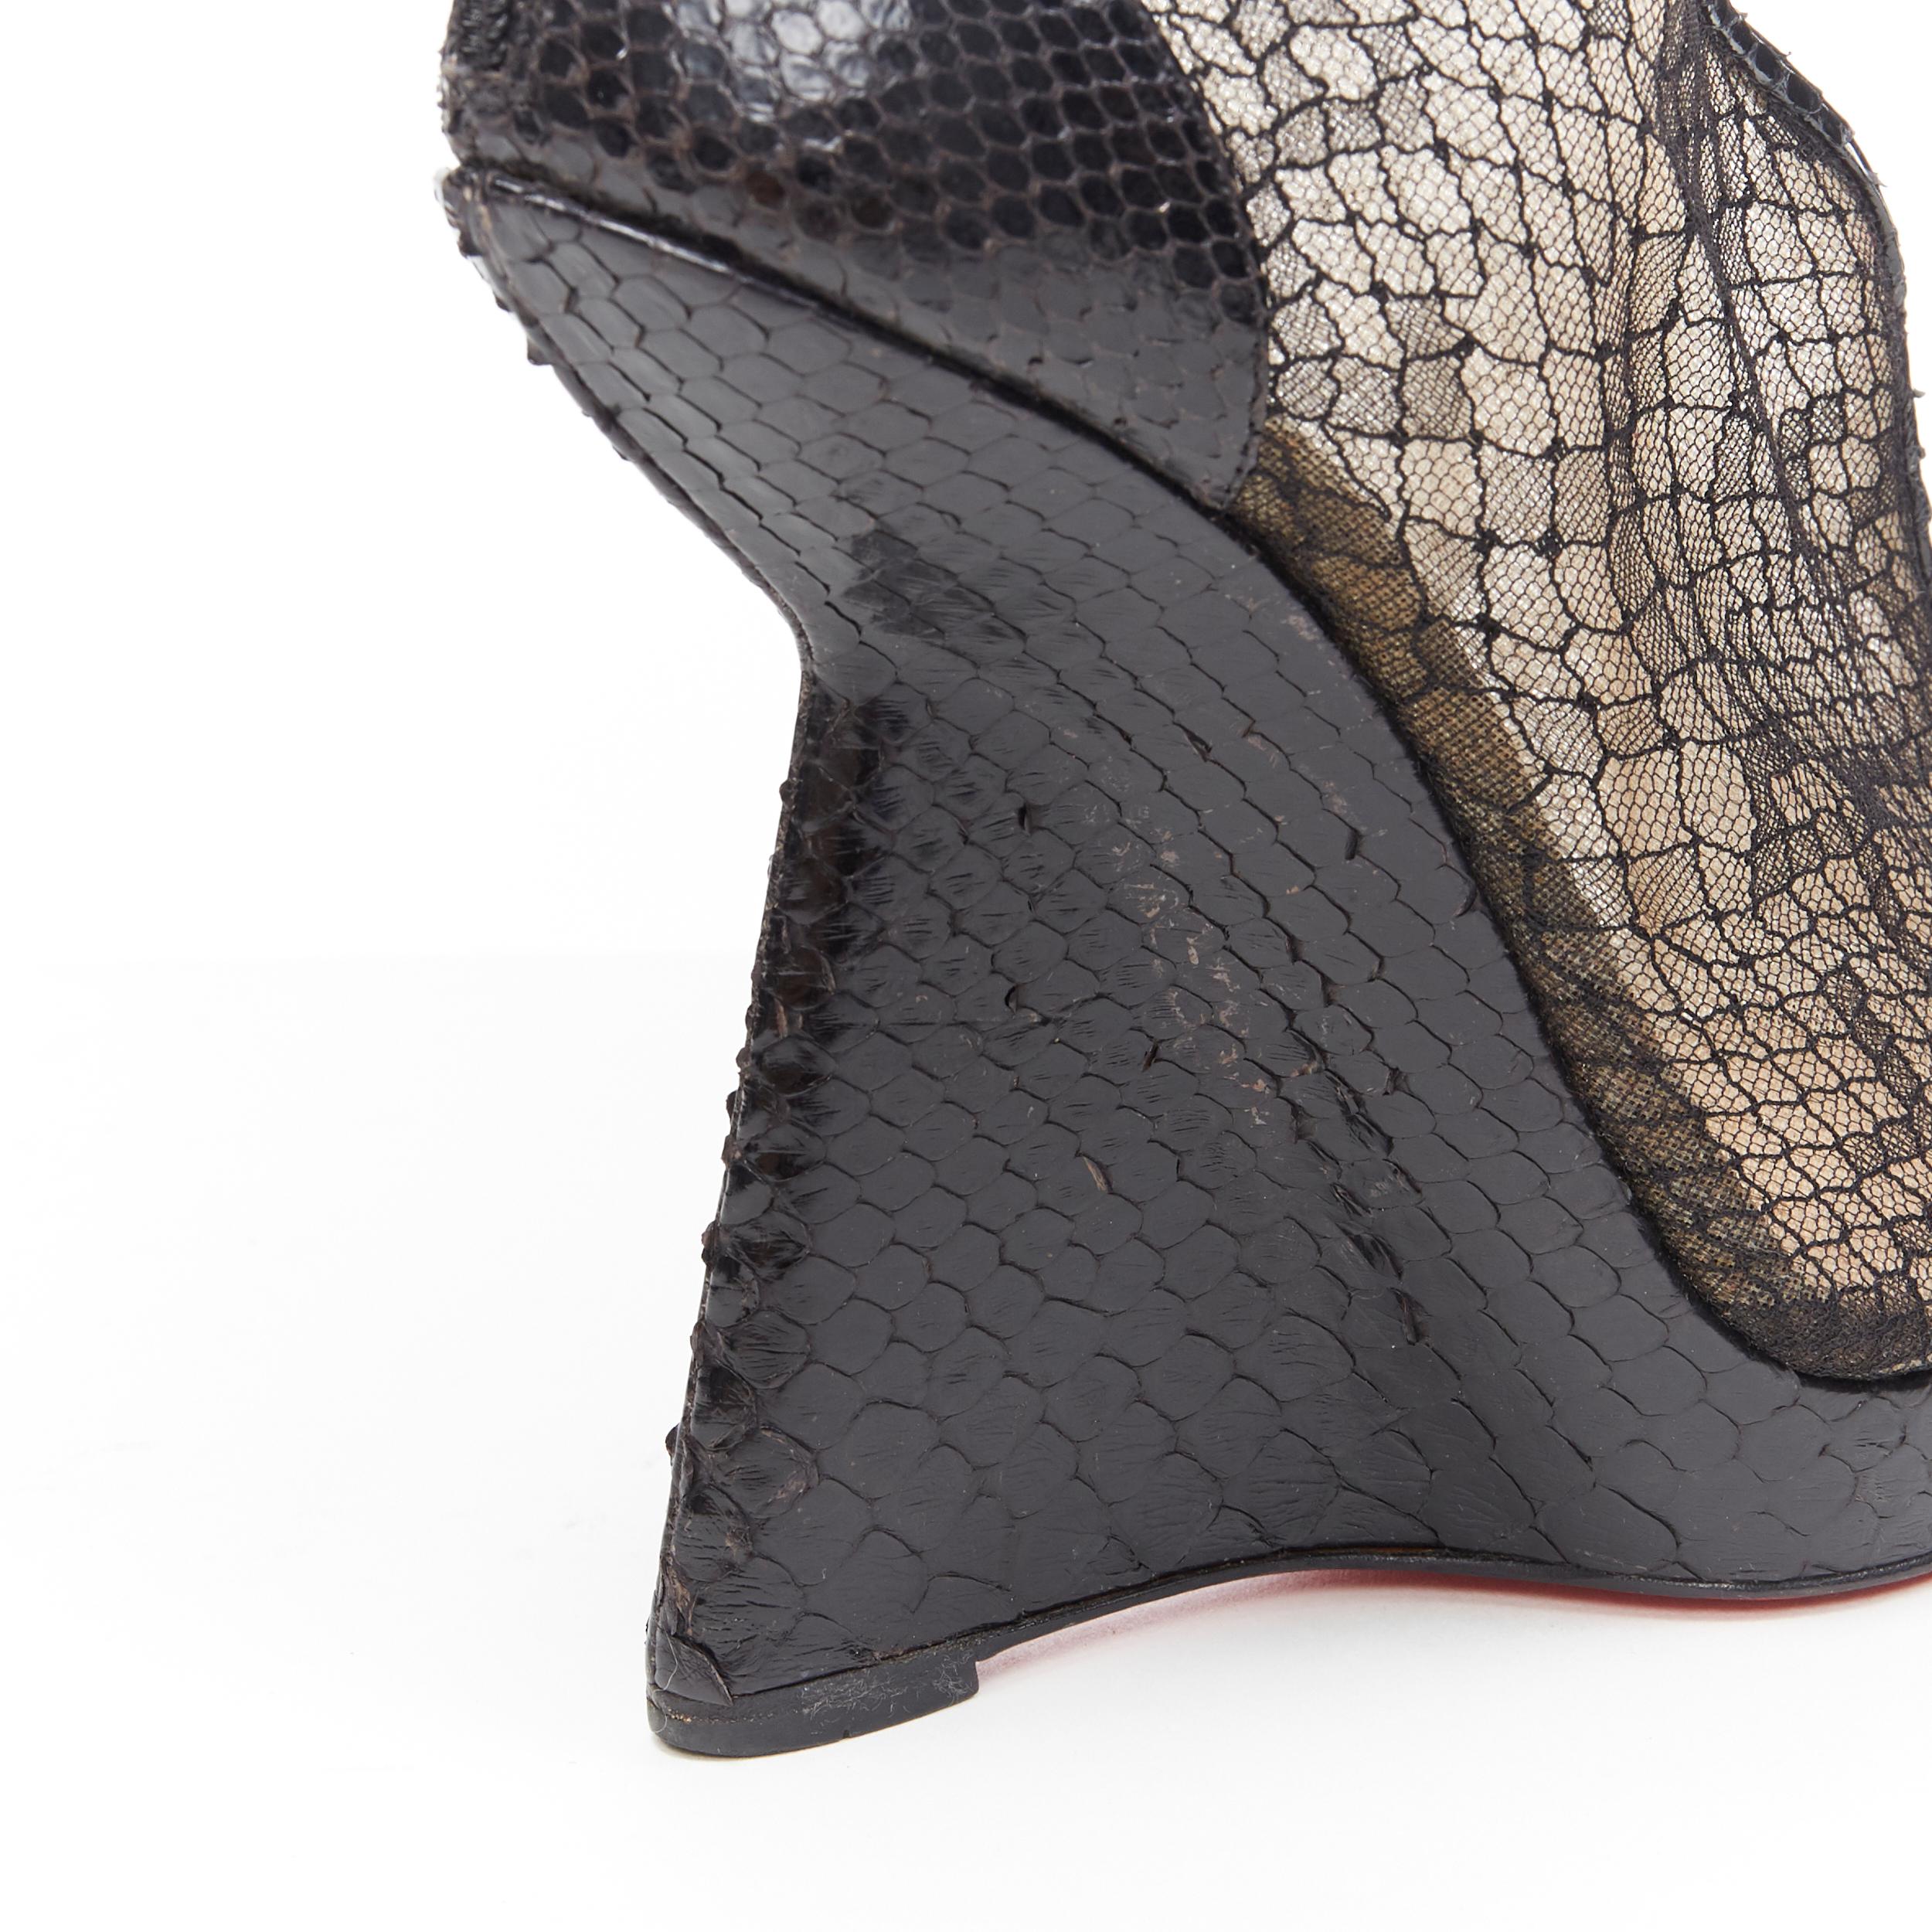 CHRISTIAN LOUBOUTIN Janet 120 black lace peep toe platform scaled wedge EU37
Brand: Christian Louboutin
Designer: Christian Louboutin
Model Name / Style: Janet 120
Material: Leather
Color: Black
Pattern: Other
Closure: Zip
Lining material: